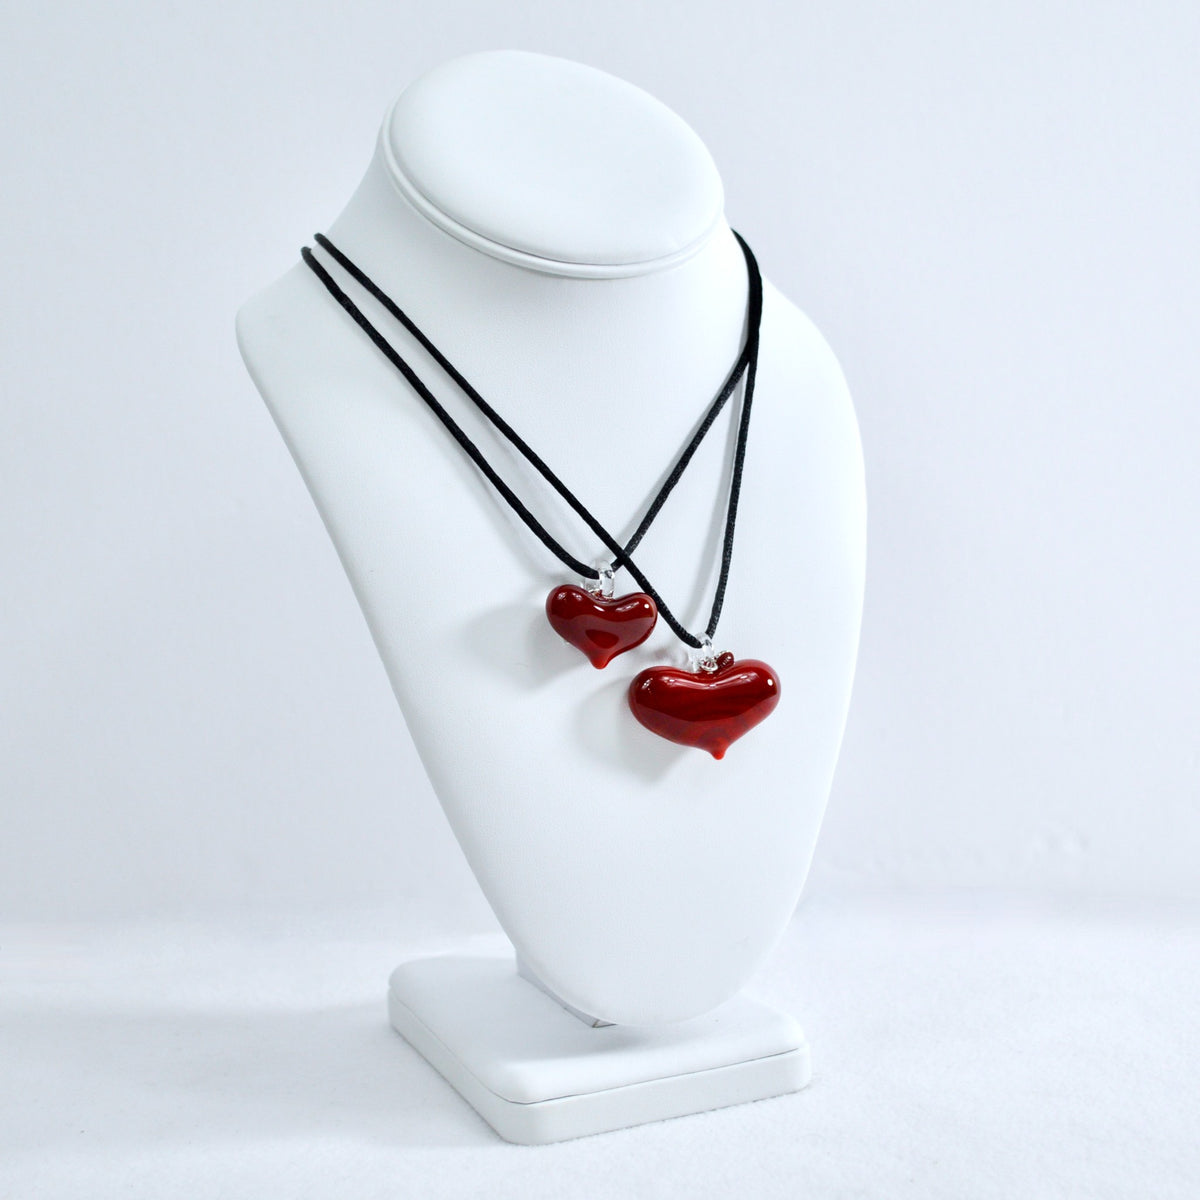 Murano Glass Mini Heart Pendant Necklace, Small or Large, Made in Italy - My Italian Decor